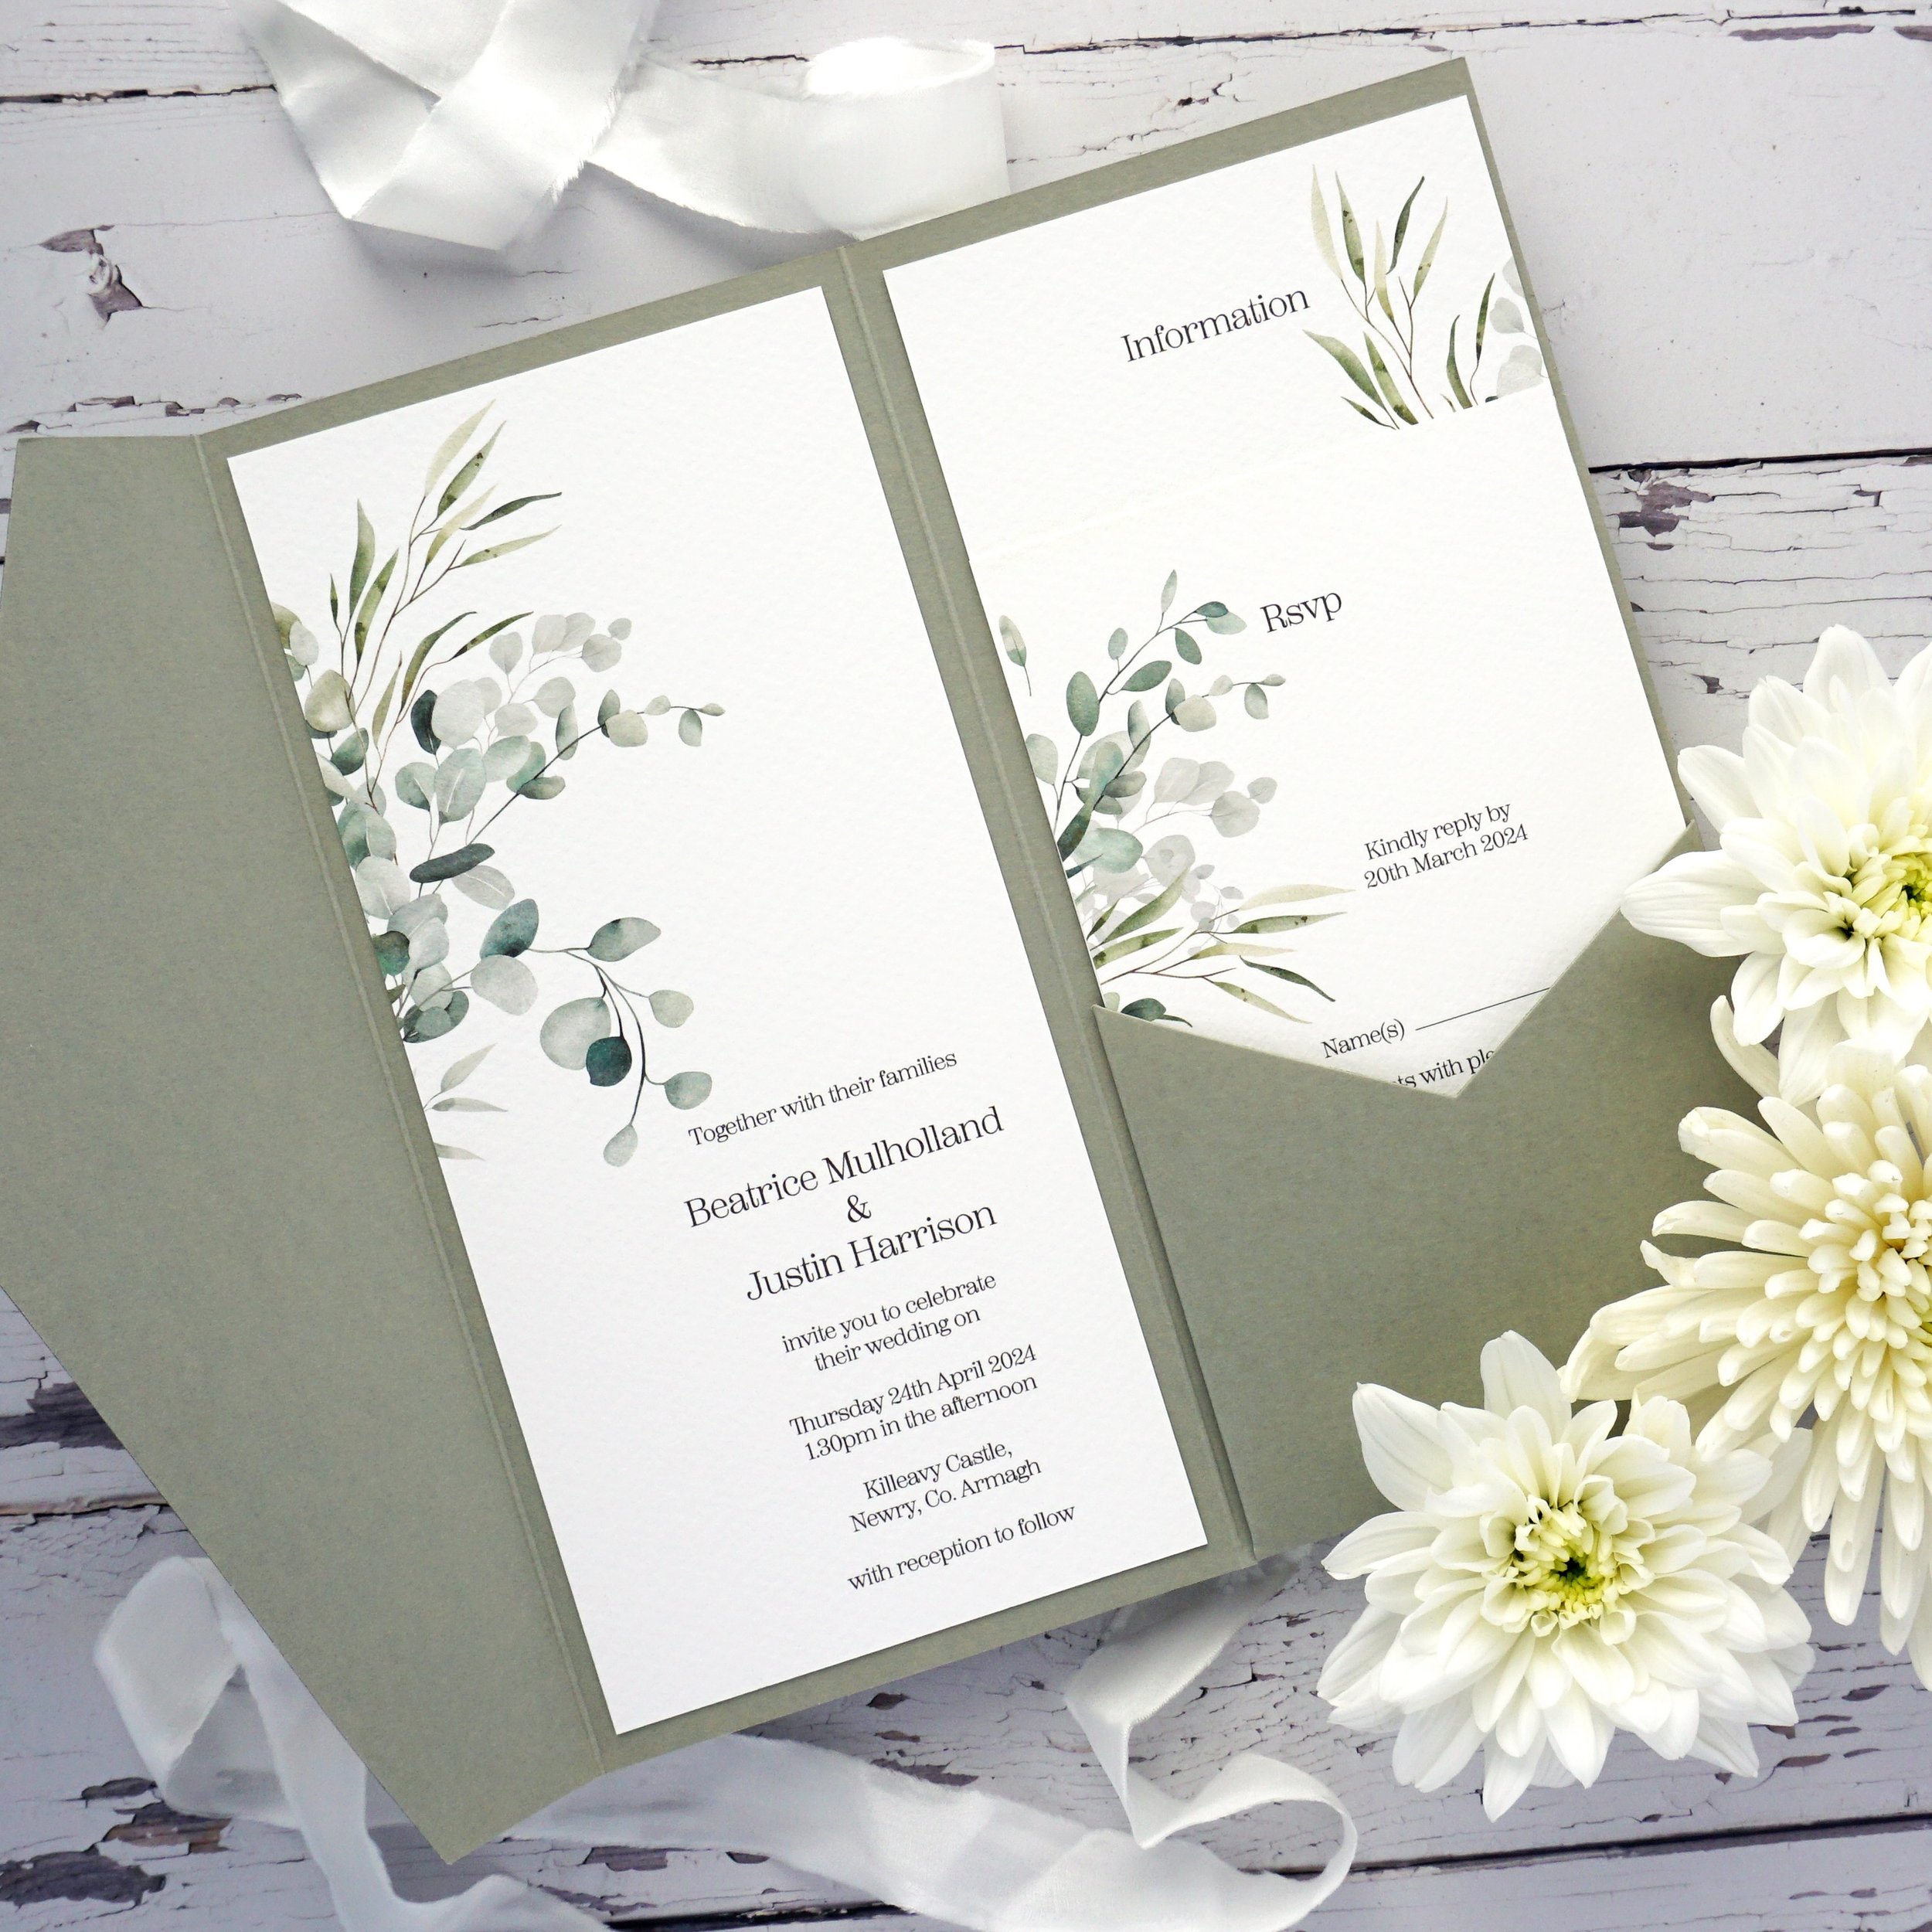 BEATRICE - Pocketfolds are a great way to display your stationery, not only are they practical by holding all cards in one place but they also allow the suite to be shown off in all its glory. The Beatrice suite is no exception, with invitation, deta